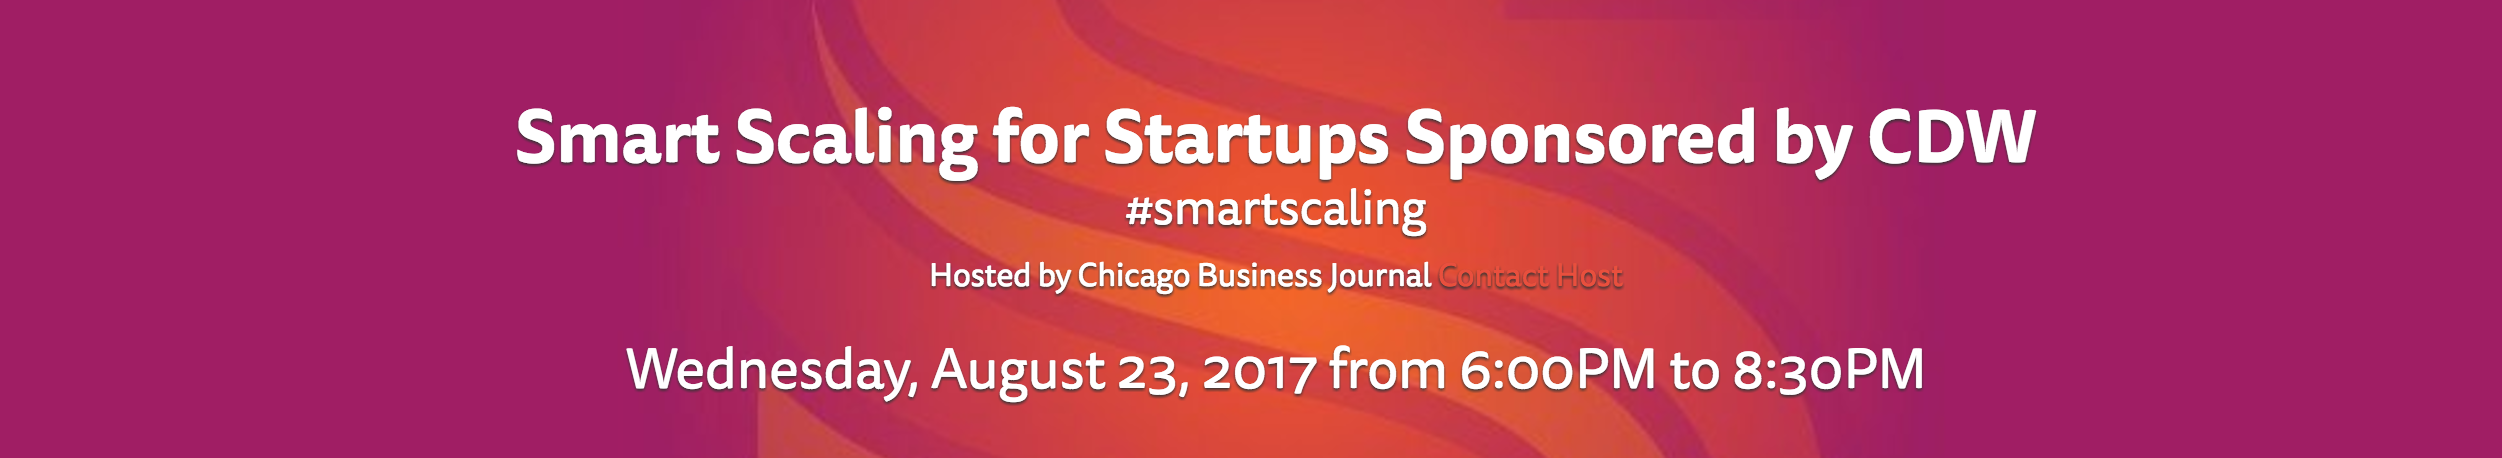 Smart Scaling for Startups Sponsored by CDW